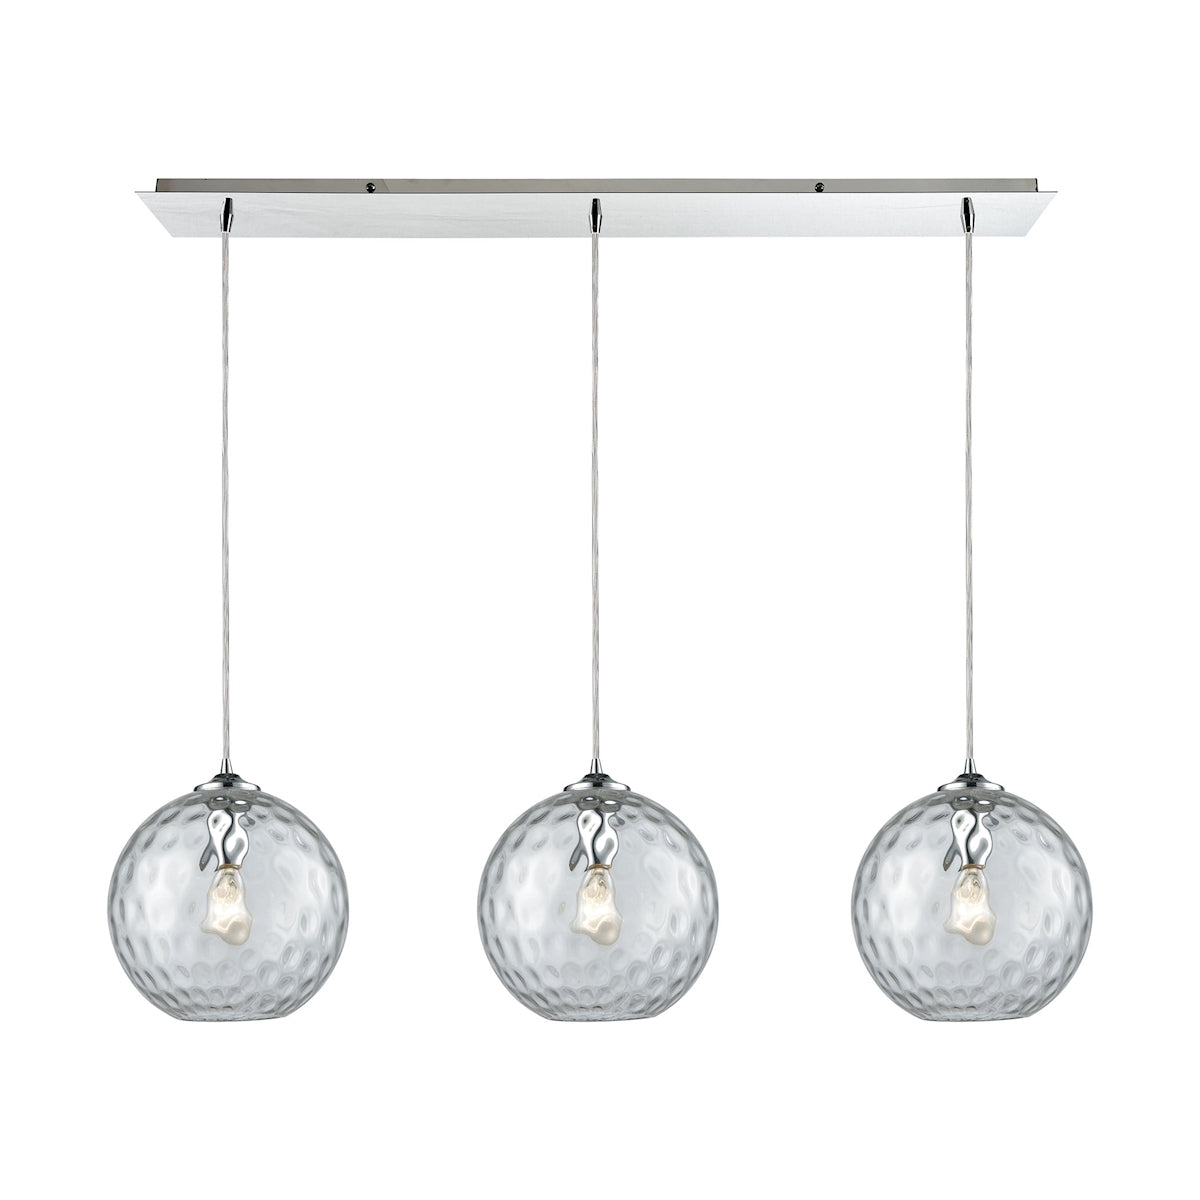 ELK Lighting 31380/3LP-CLR Watersphere 3-Light Linear Mini Pendant Fixture in Chrome with Hammered Clear Glass